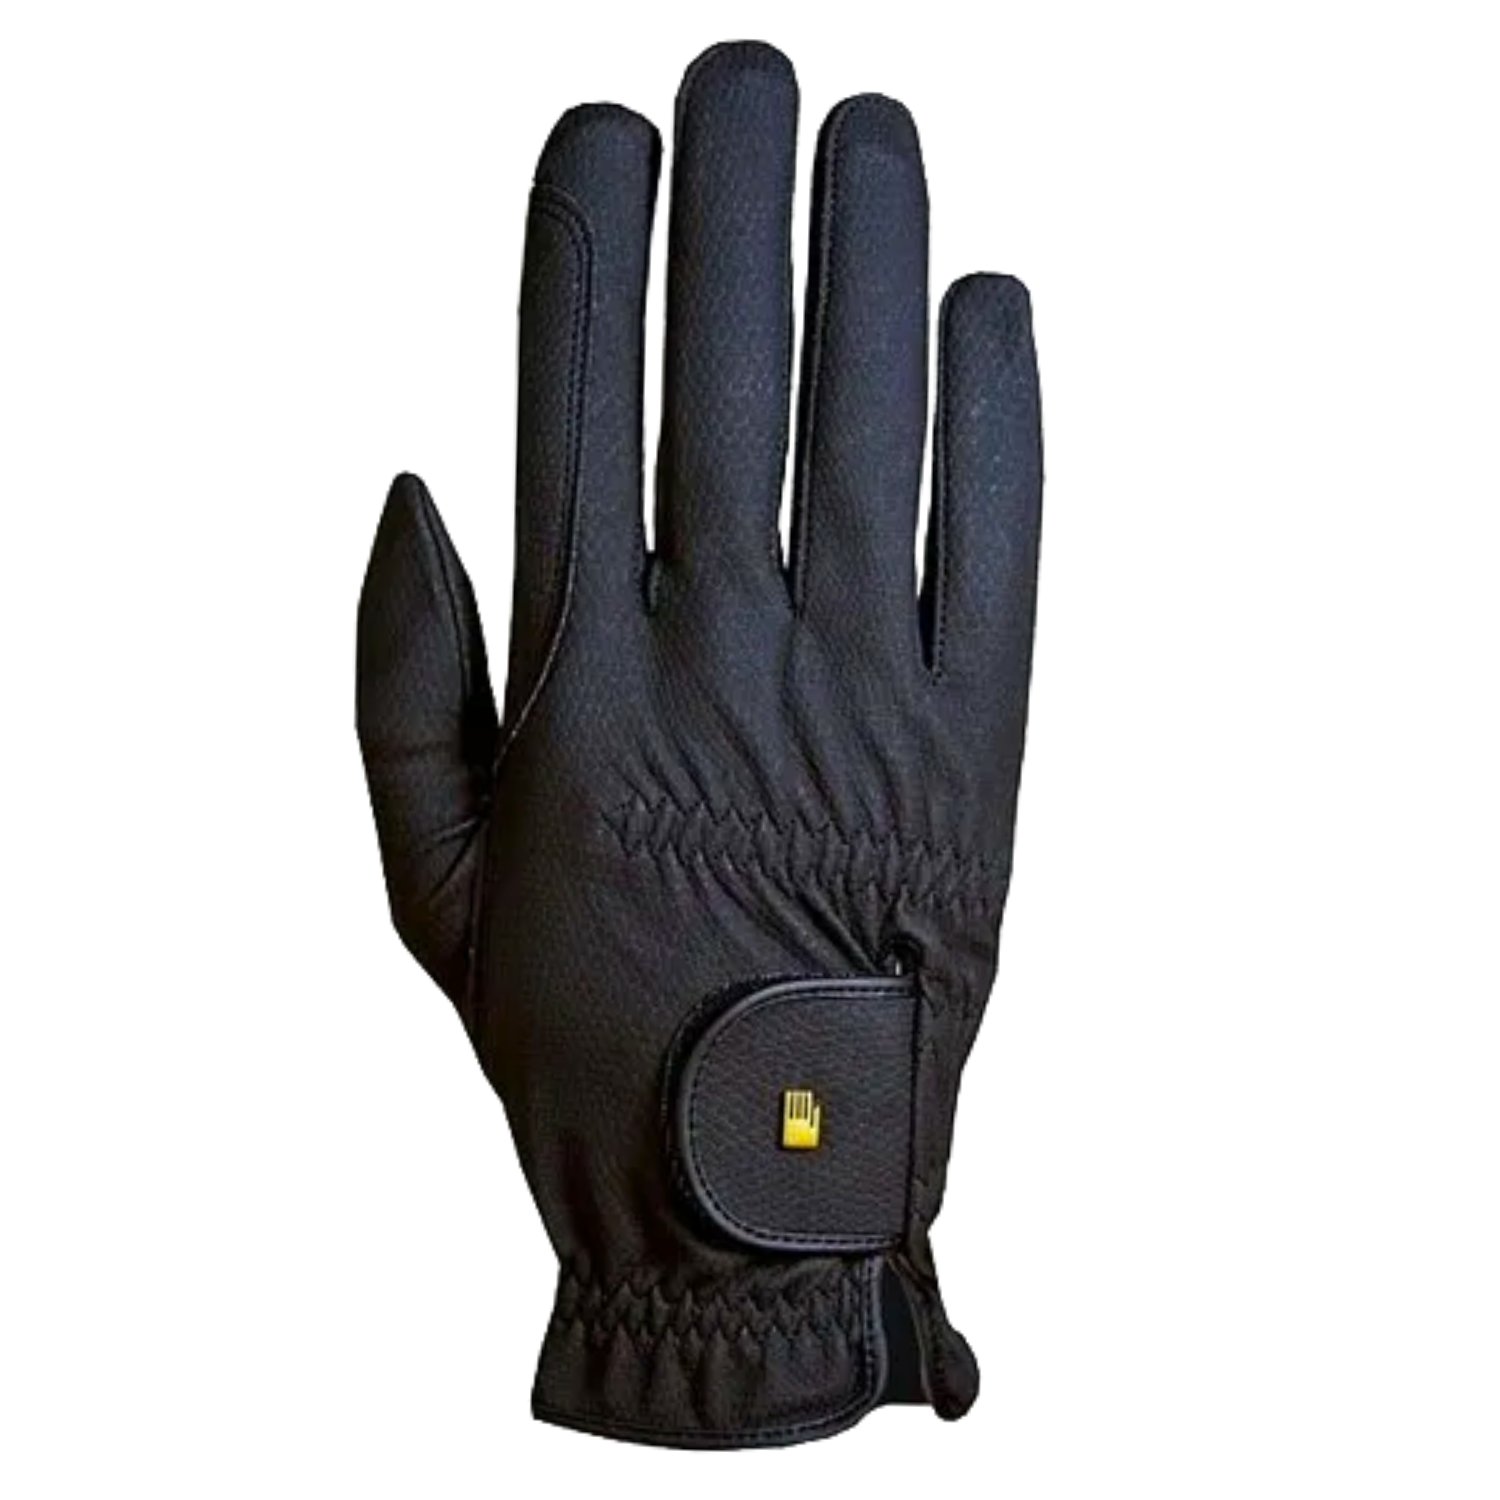 Roeckl Chester Grip Riding Gloves